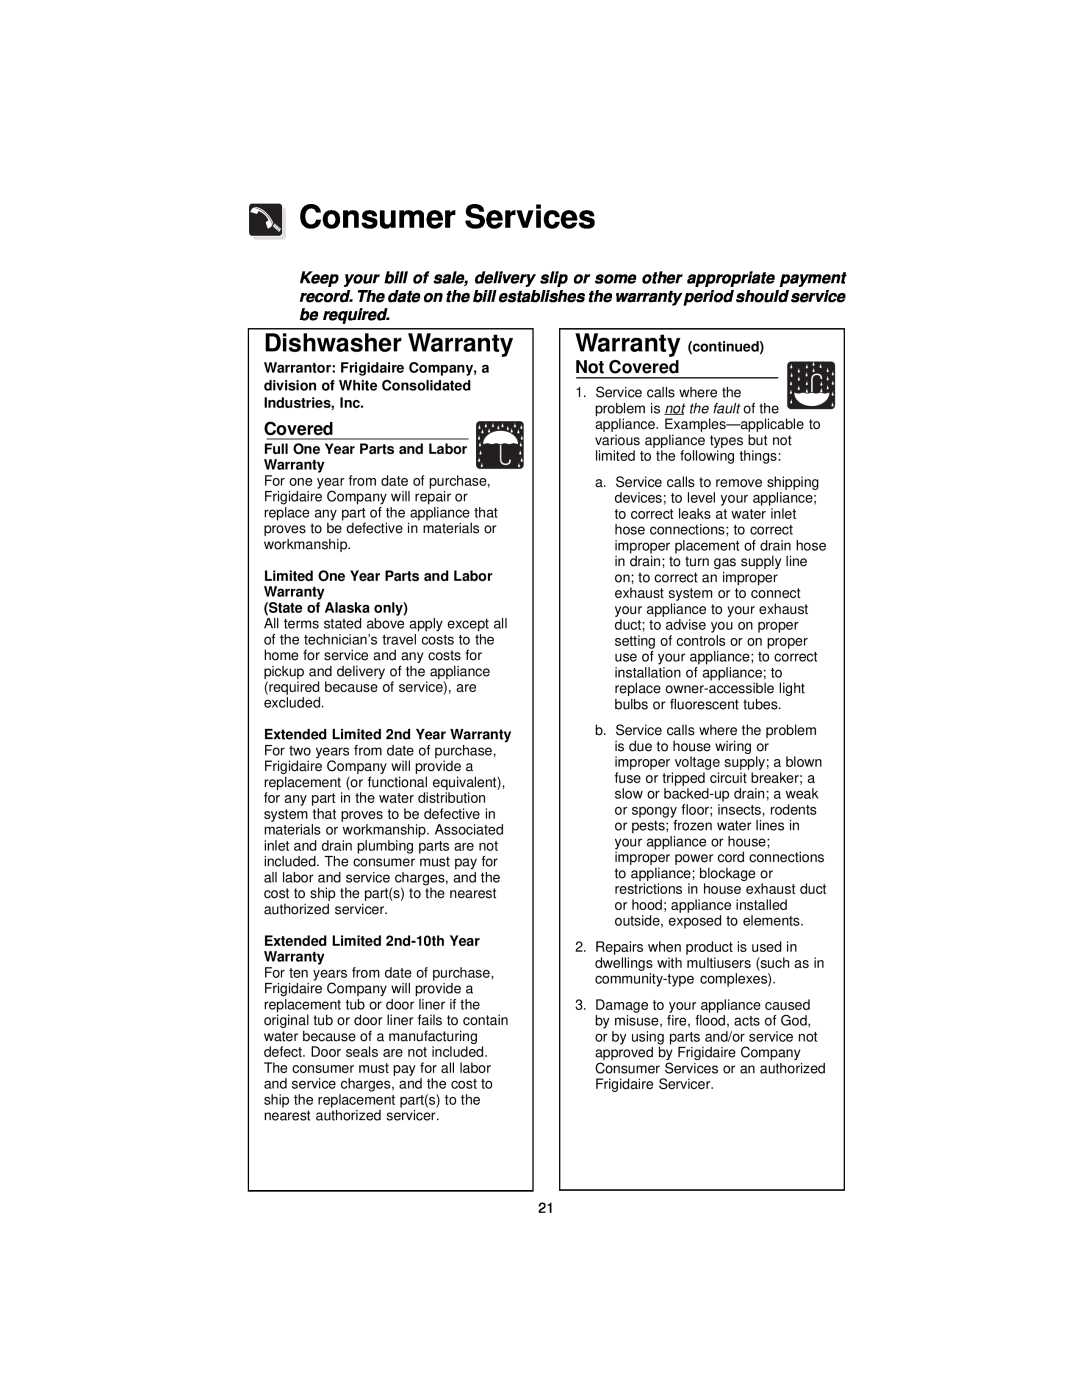 Frigidaire MDB100 Consumer Services, Dishwasher Warranty, Not Covered, Limited One Year Parts and Labor Warranty 